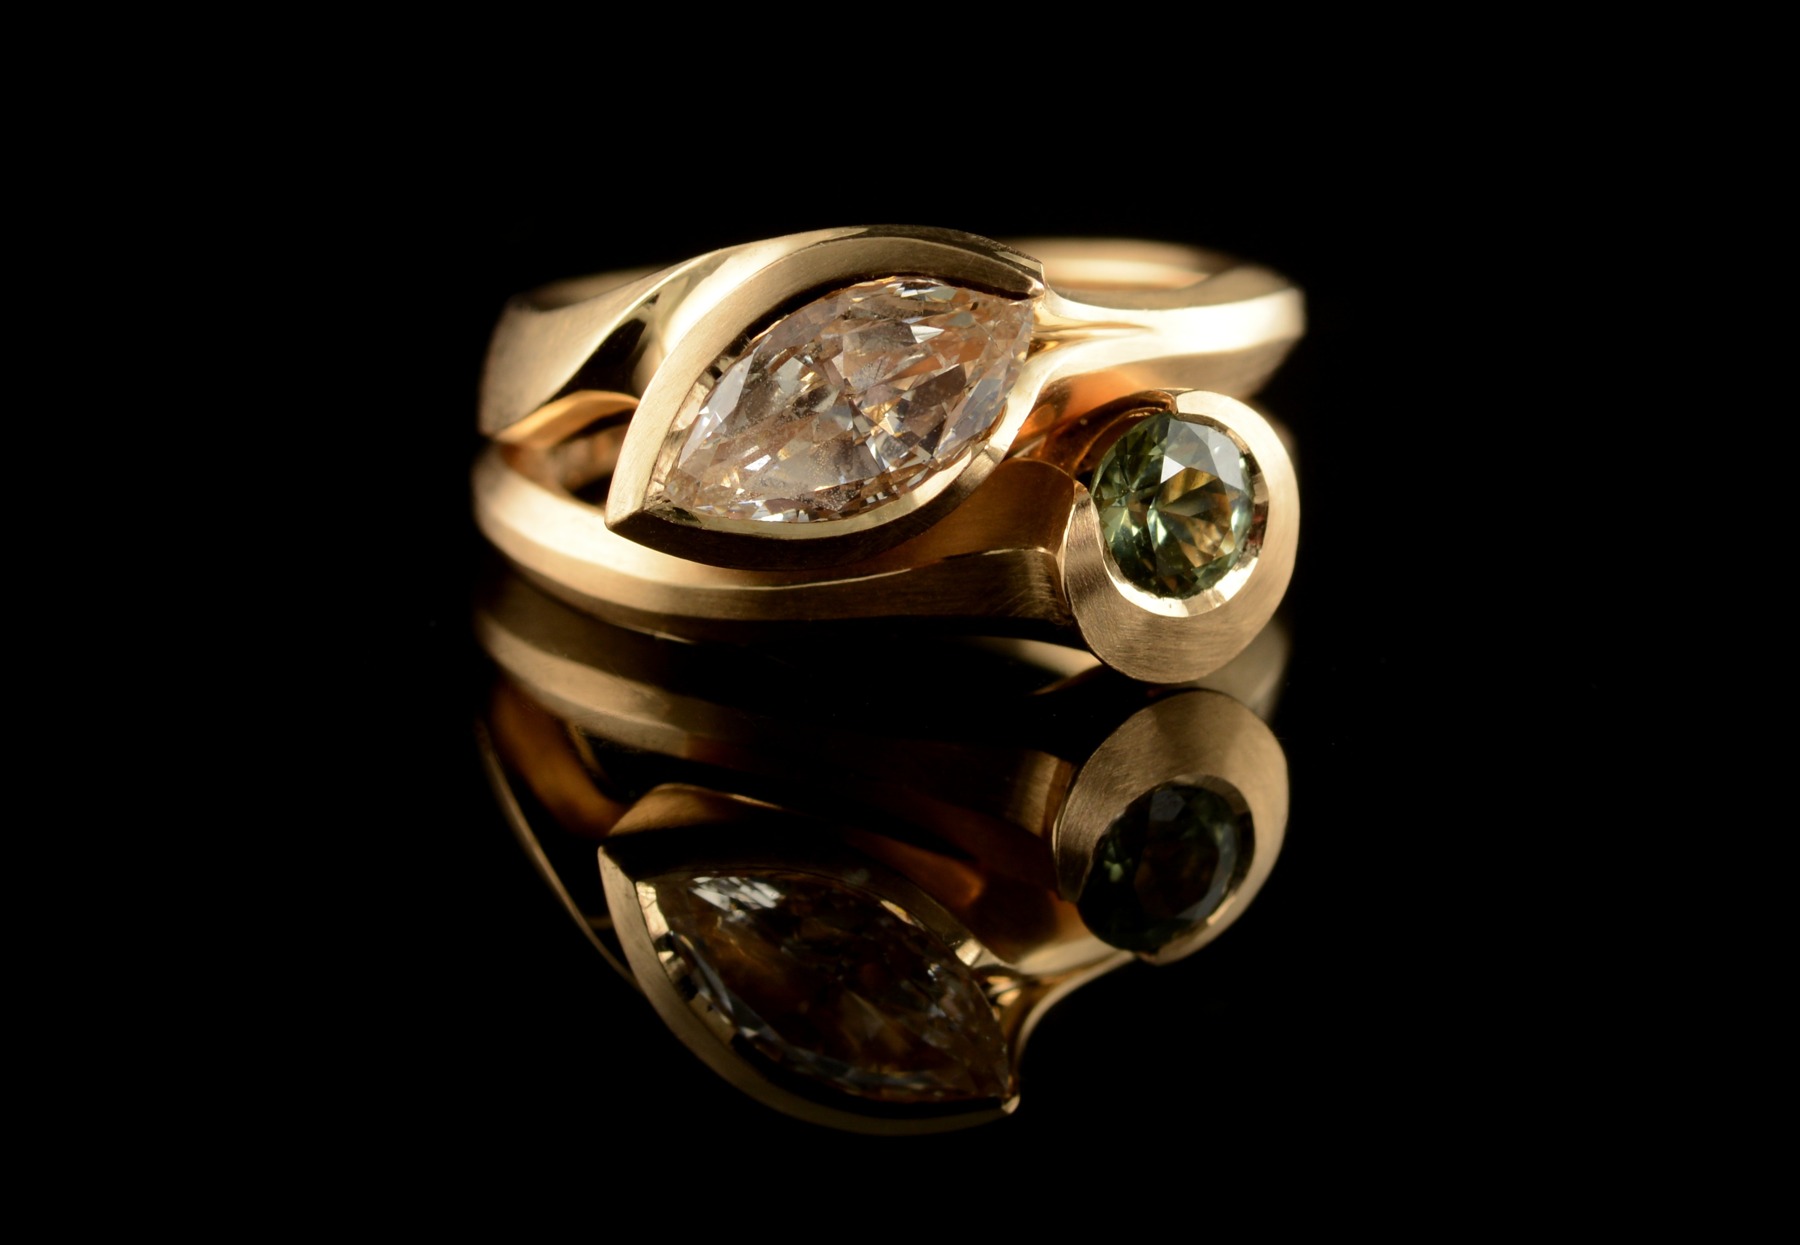 Unusual hand carved gold engagement ring with marquise diamond and fitted carved wedding ring with round green sapphire